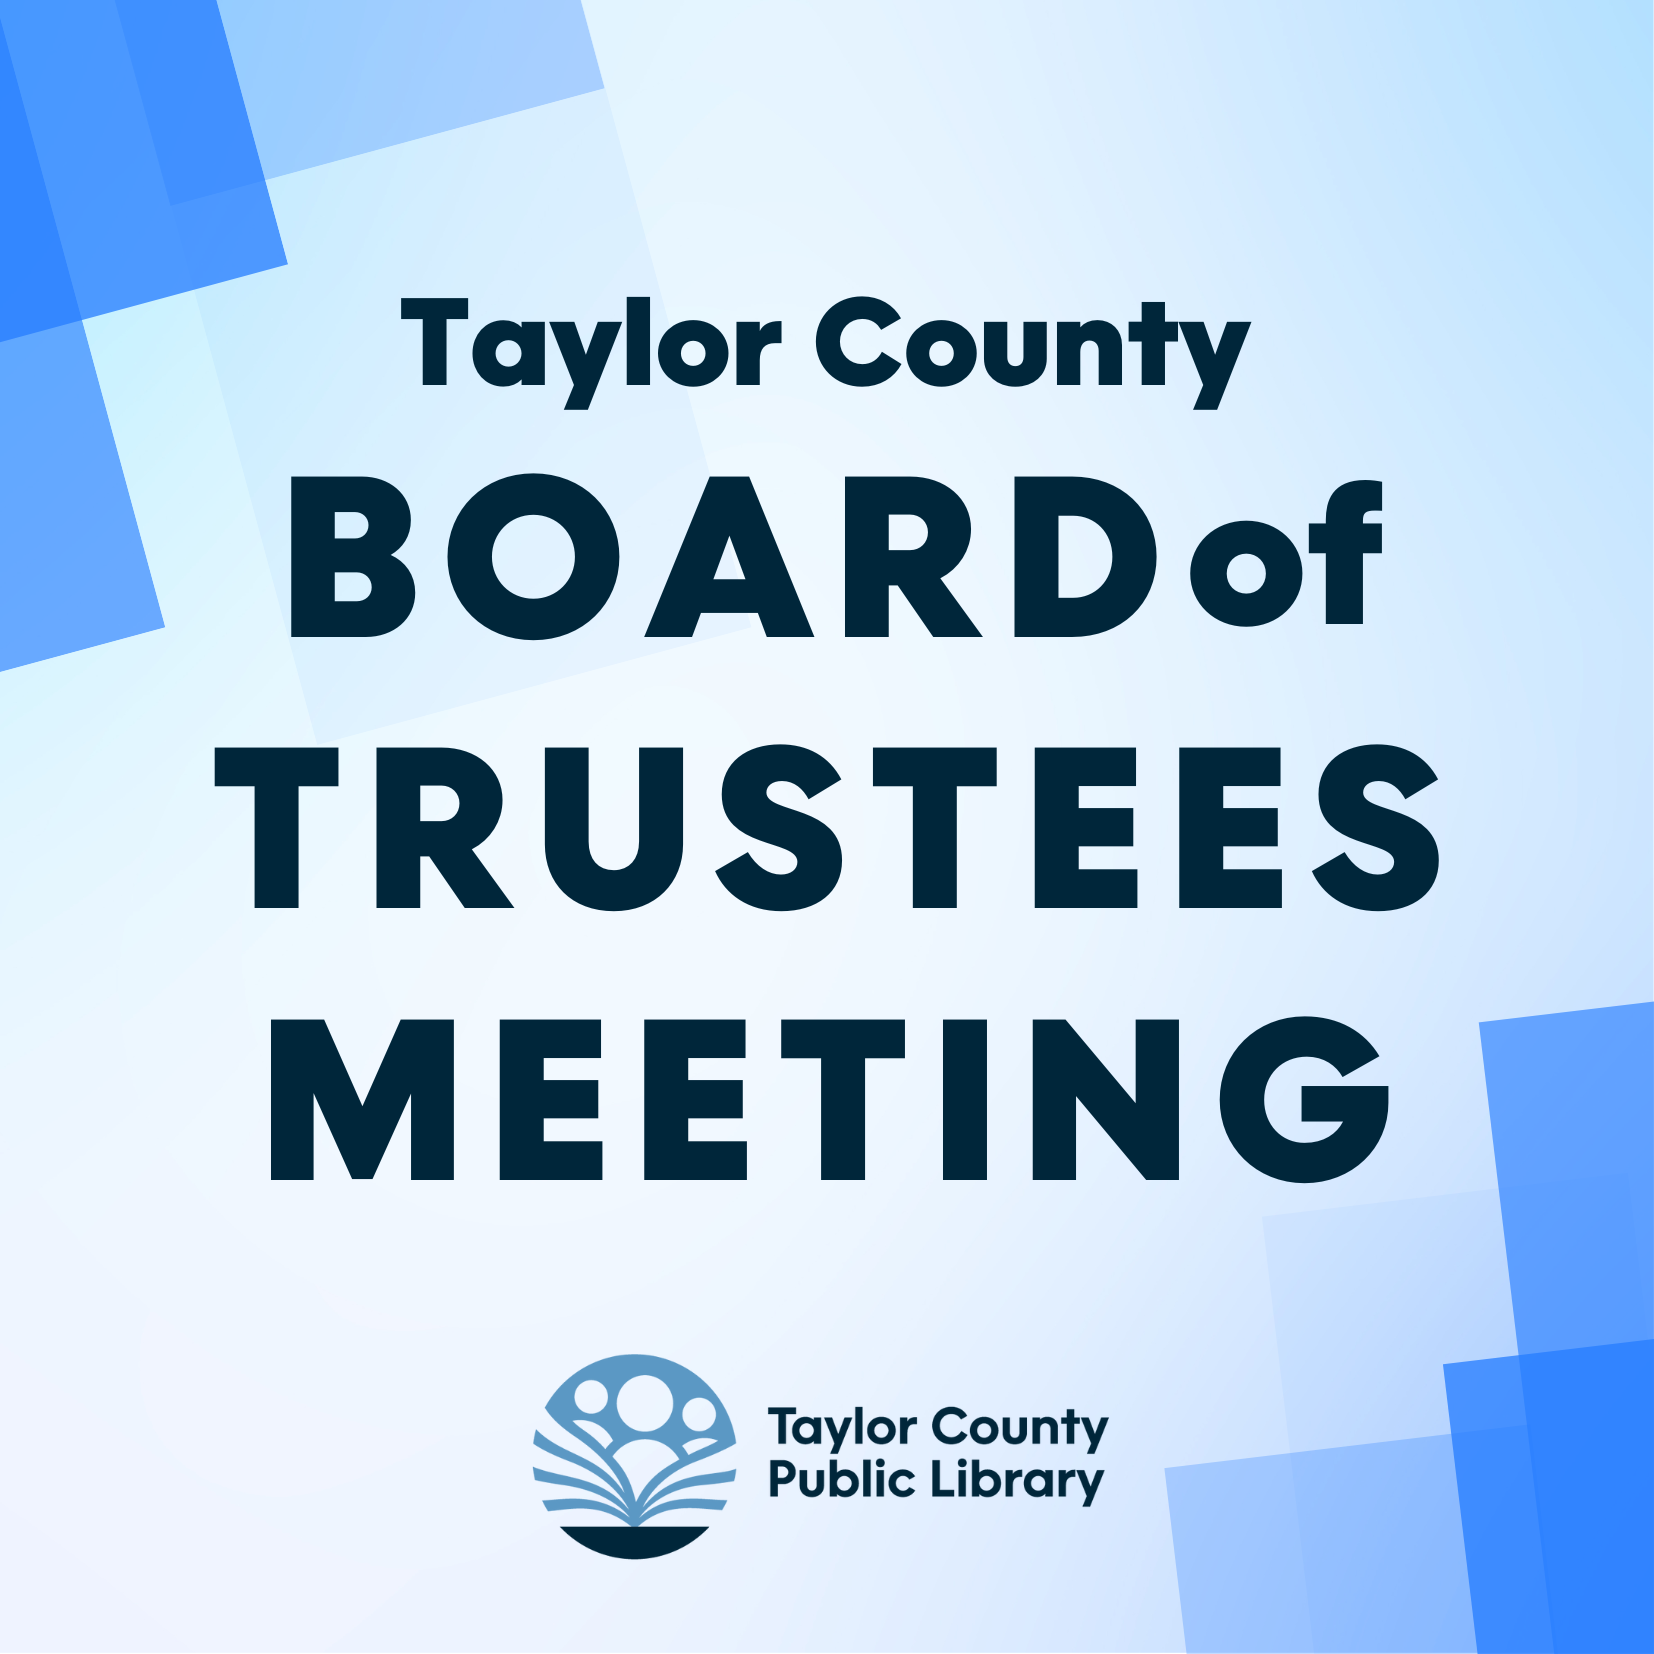 Taylor County Board of Trustees Meeting